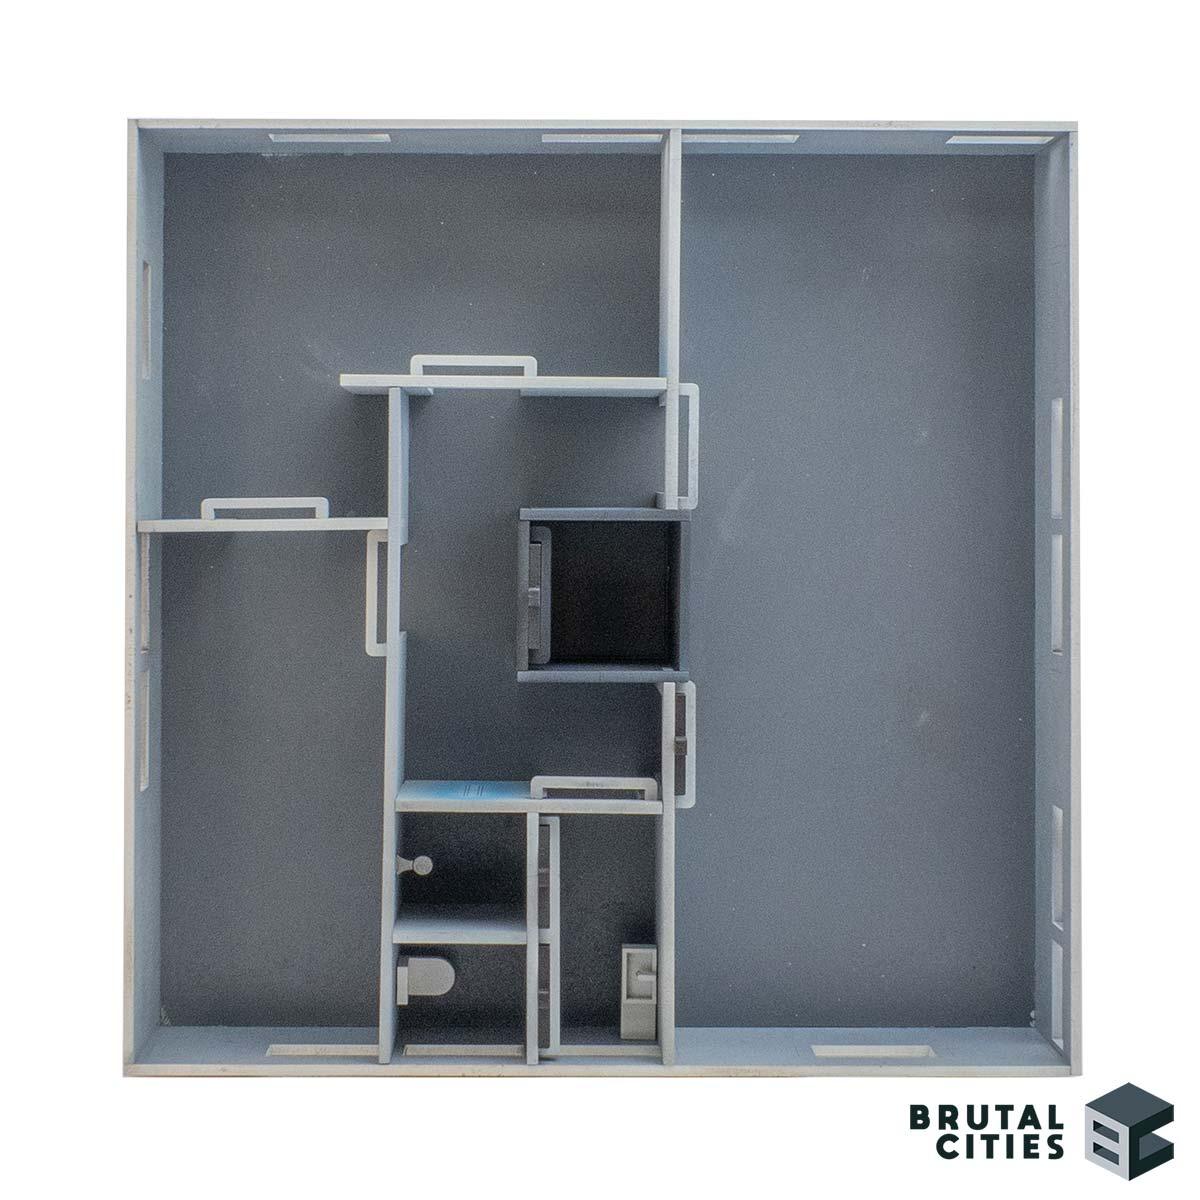 Floor plan of the internal wall terrain for bruteopolis plaza tower arranged into four separate rooms and bathroom